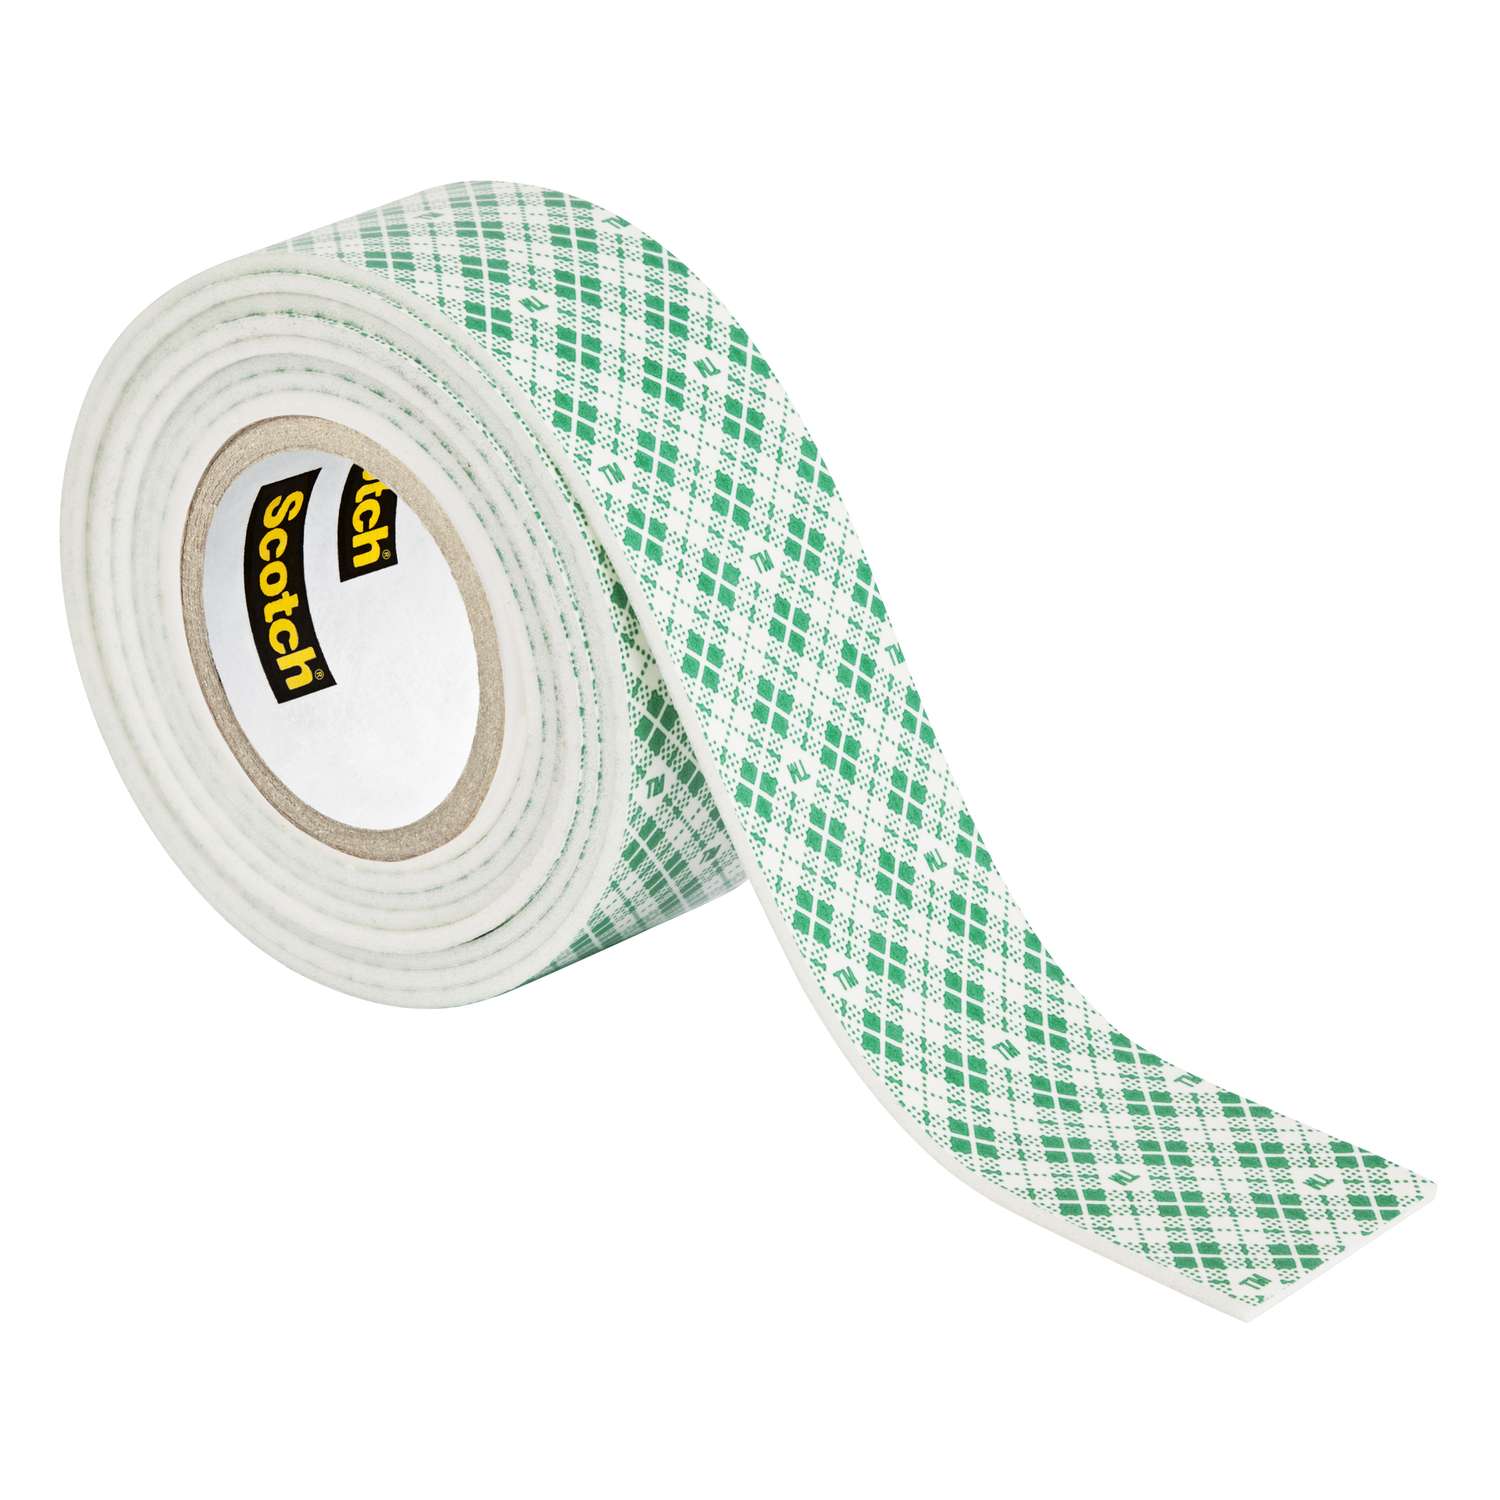 Joe's Sticky Stuff 3/4 Double-Sided Adhesive Tape - Clear